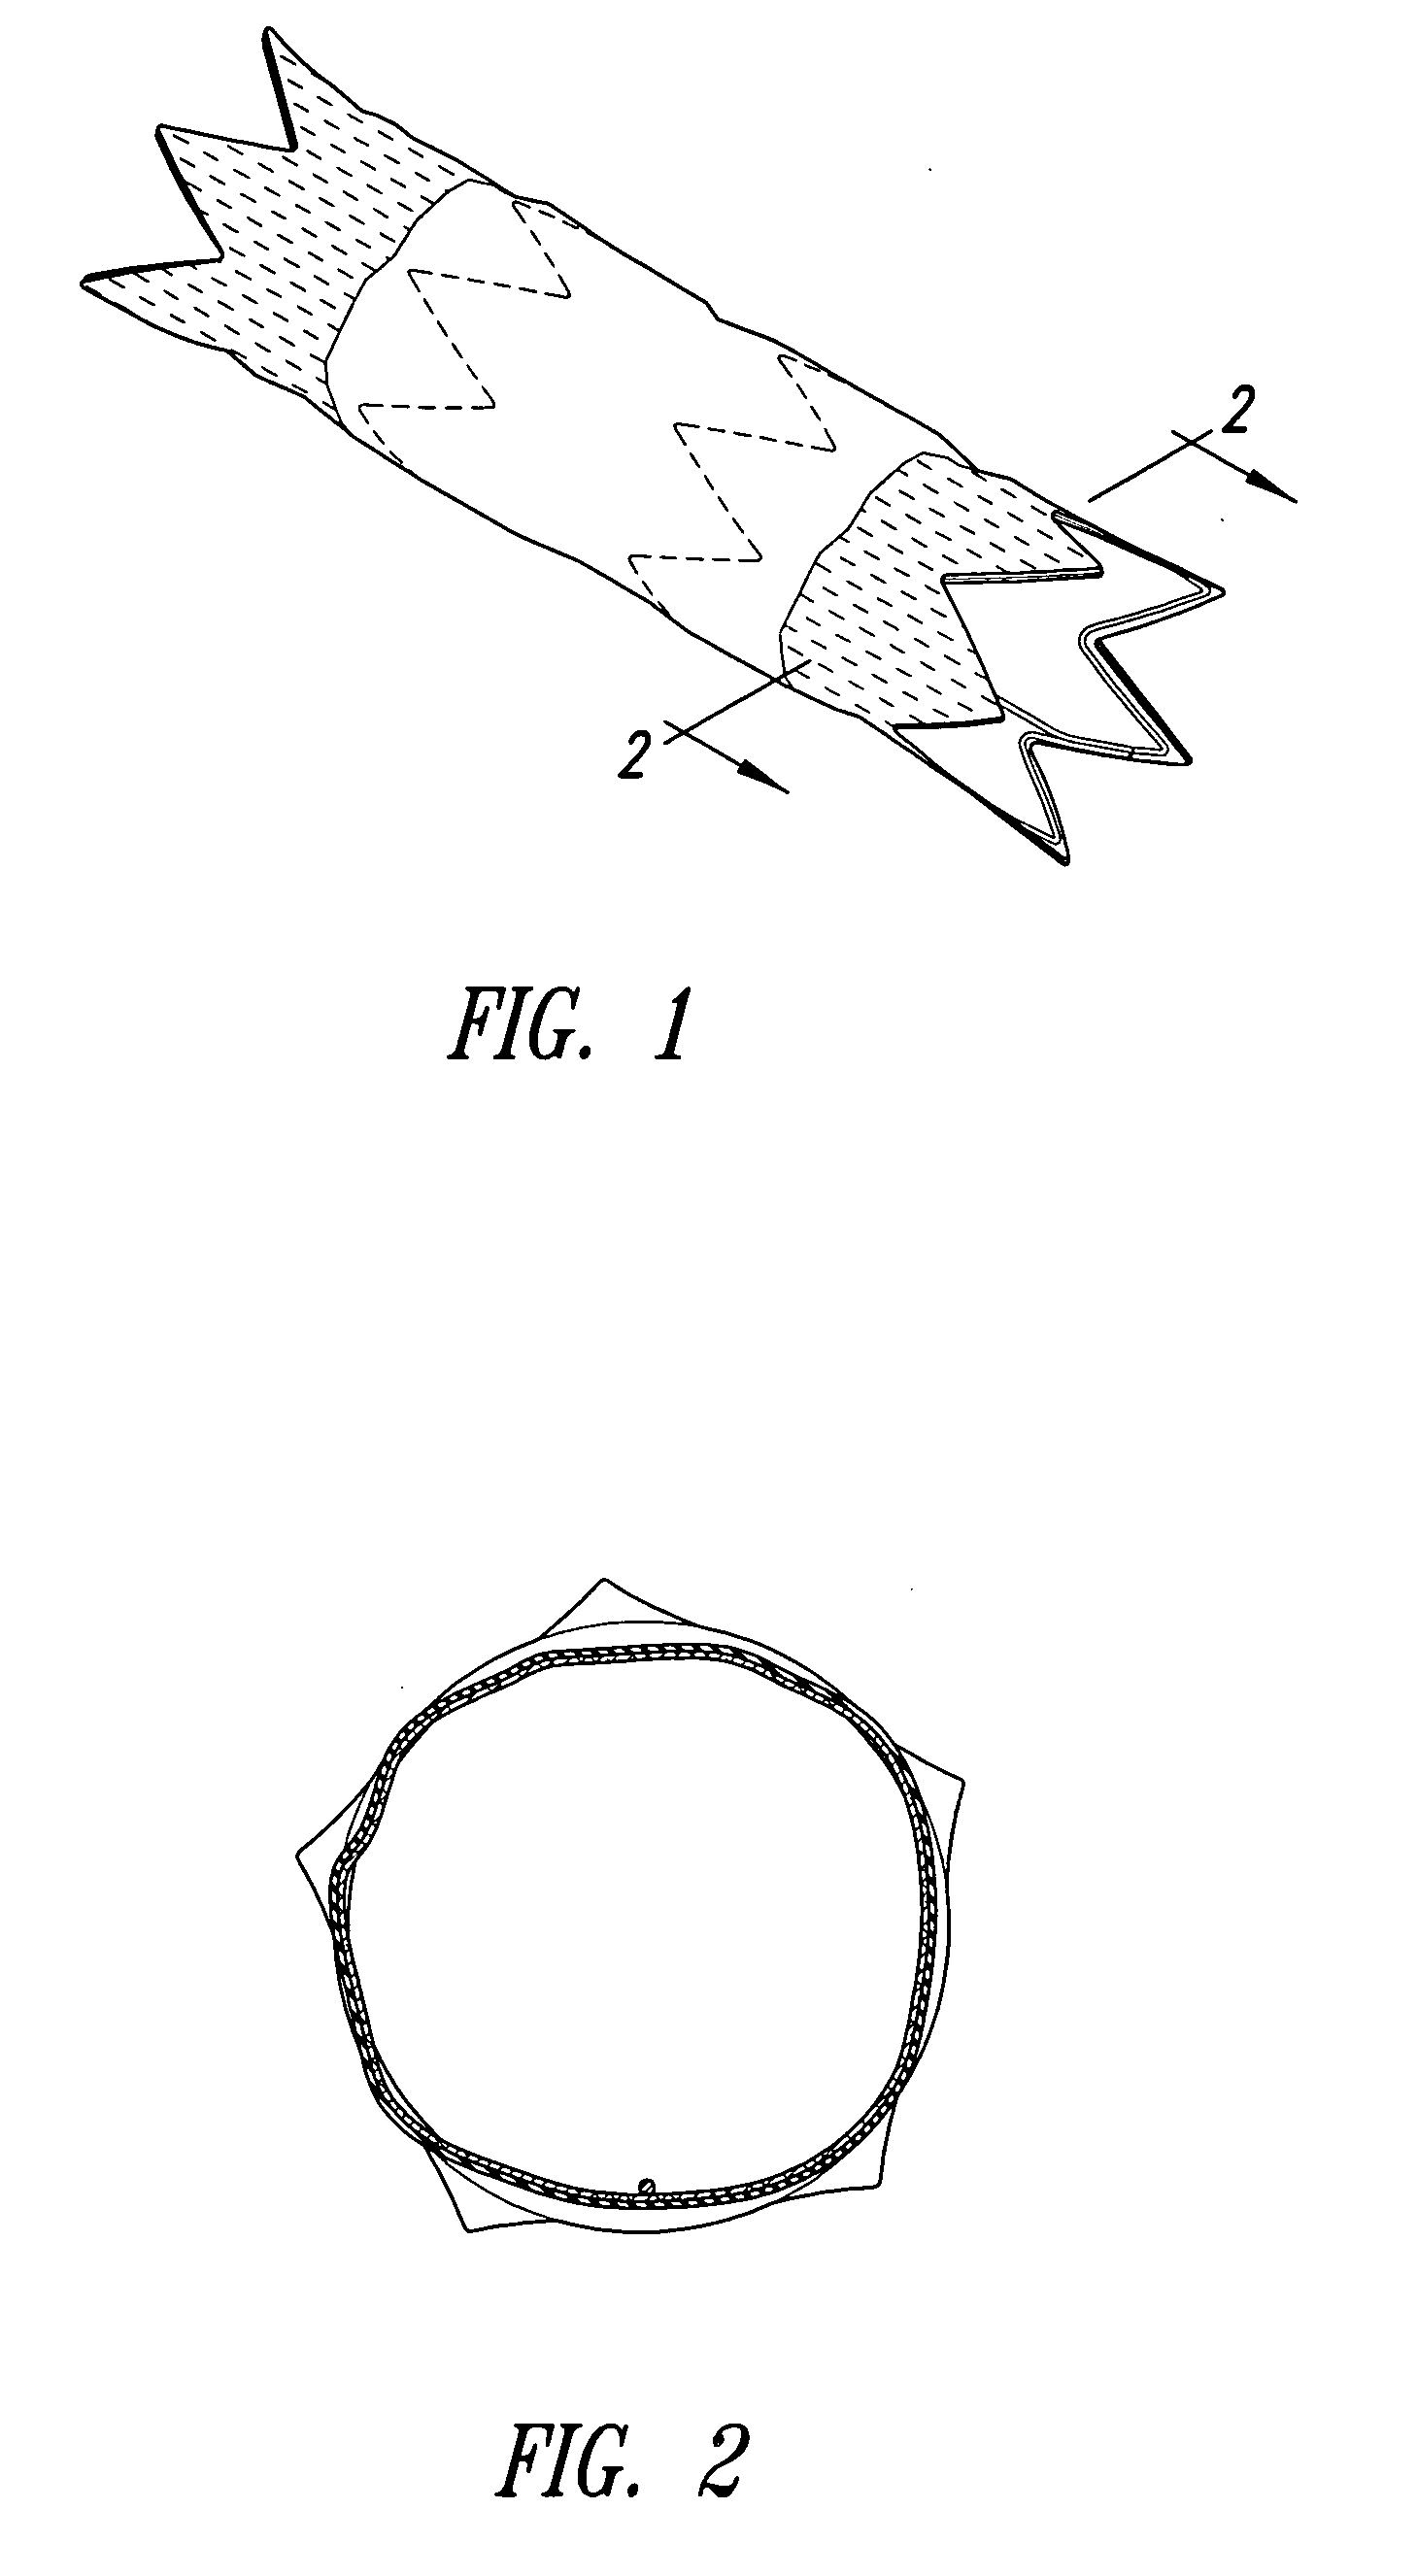 Stent grafts with bioactive coatings